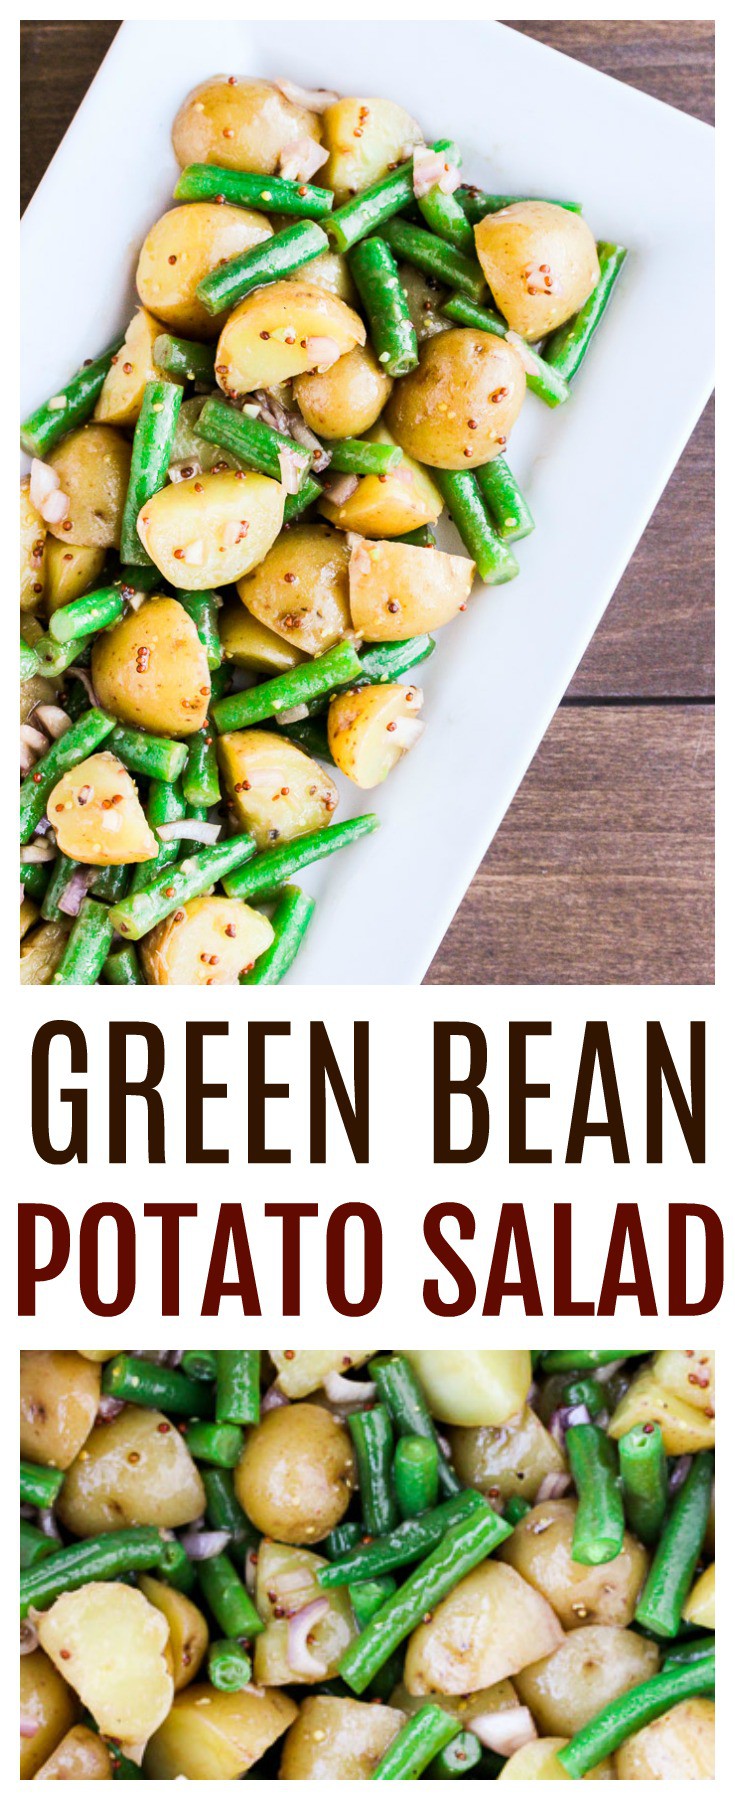 Green Bean Potato Salad is a delicious Summer side dish recipe that can be served warm or chilled! The zesty dressing really pulls everything together! | barbecue | cookout | gluten free | #dlbrecipes #potatosalad #greenbeansalad #sidedish #glutenfree